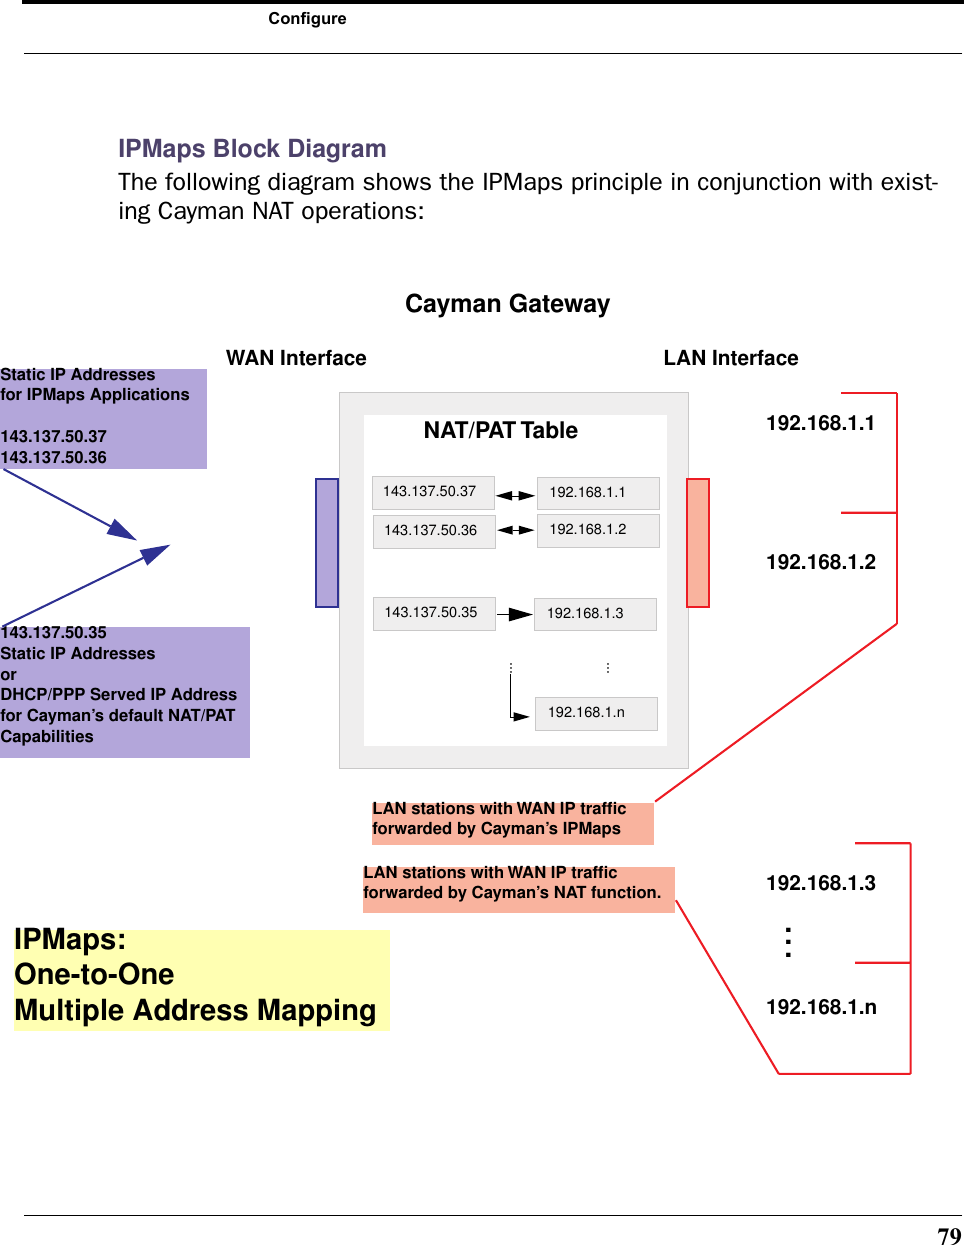 79ConfigureIPMaps Block DiagramThe following diagram shows the IPMaps principle in conjunction with exist-ing Cayman NAT operations:NAT/PAT Table143.137.50.37143.137.50.36143.137.50.35192.168.1.1192.168.1.n192.168.1.3192.168.1.2......Cayman GatewayStatic IP Addressesfor IPMaps Applications143.137.50.37143.137.50.36143.137.50.35Static IP AddressesorDHCP/PPP Served IP Address for Cayman’s default NAT/PAT CapabilitiesIPMaps:One-to-OneMultiple Address MappingLAN stations with WAN IP trafﬁc forwarded by Cayman’s IPMapsLAN stations with WAN IP trafﬁc forwarded by Cayman’s NAT function.WAN Interface LAN Interface192.168.1.1192.168.1.2192.168.1.3192.168.1.n...